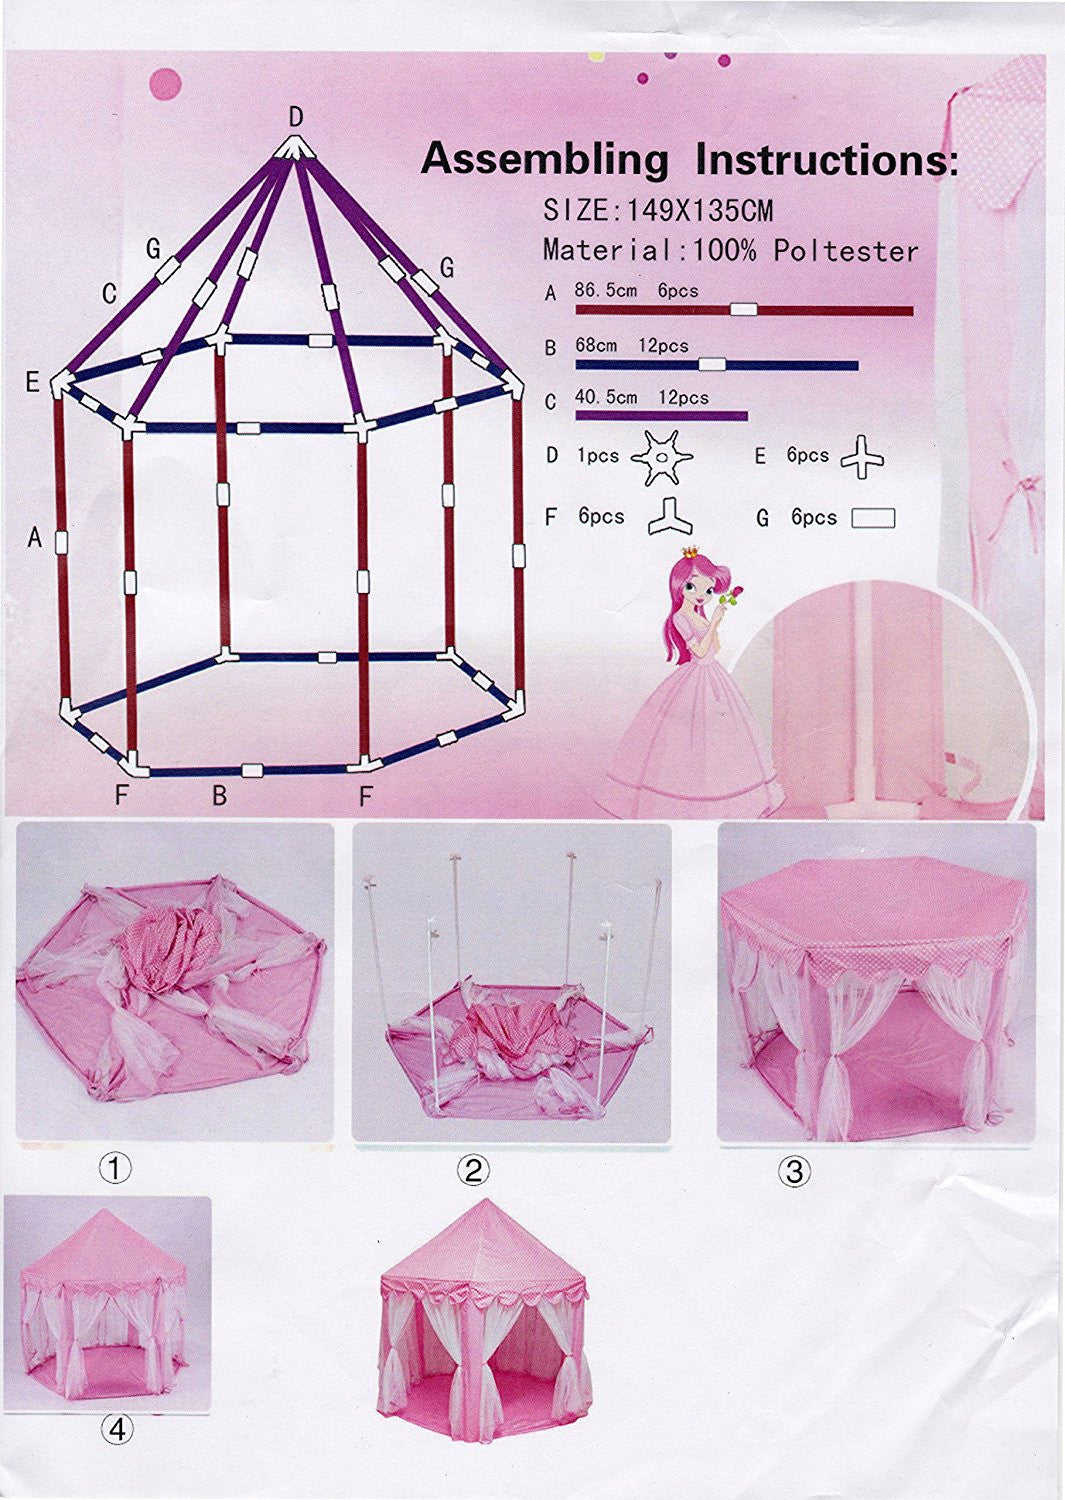 Large Indoor and Outdoor Kids Play House Pink Hexagon Princess Castle Tent Child